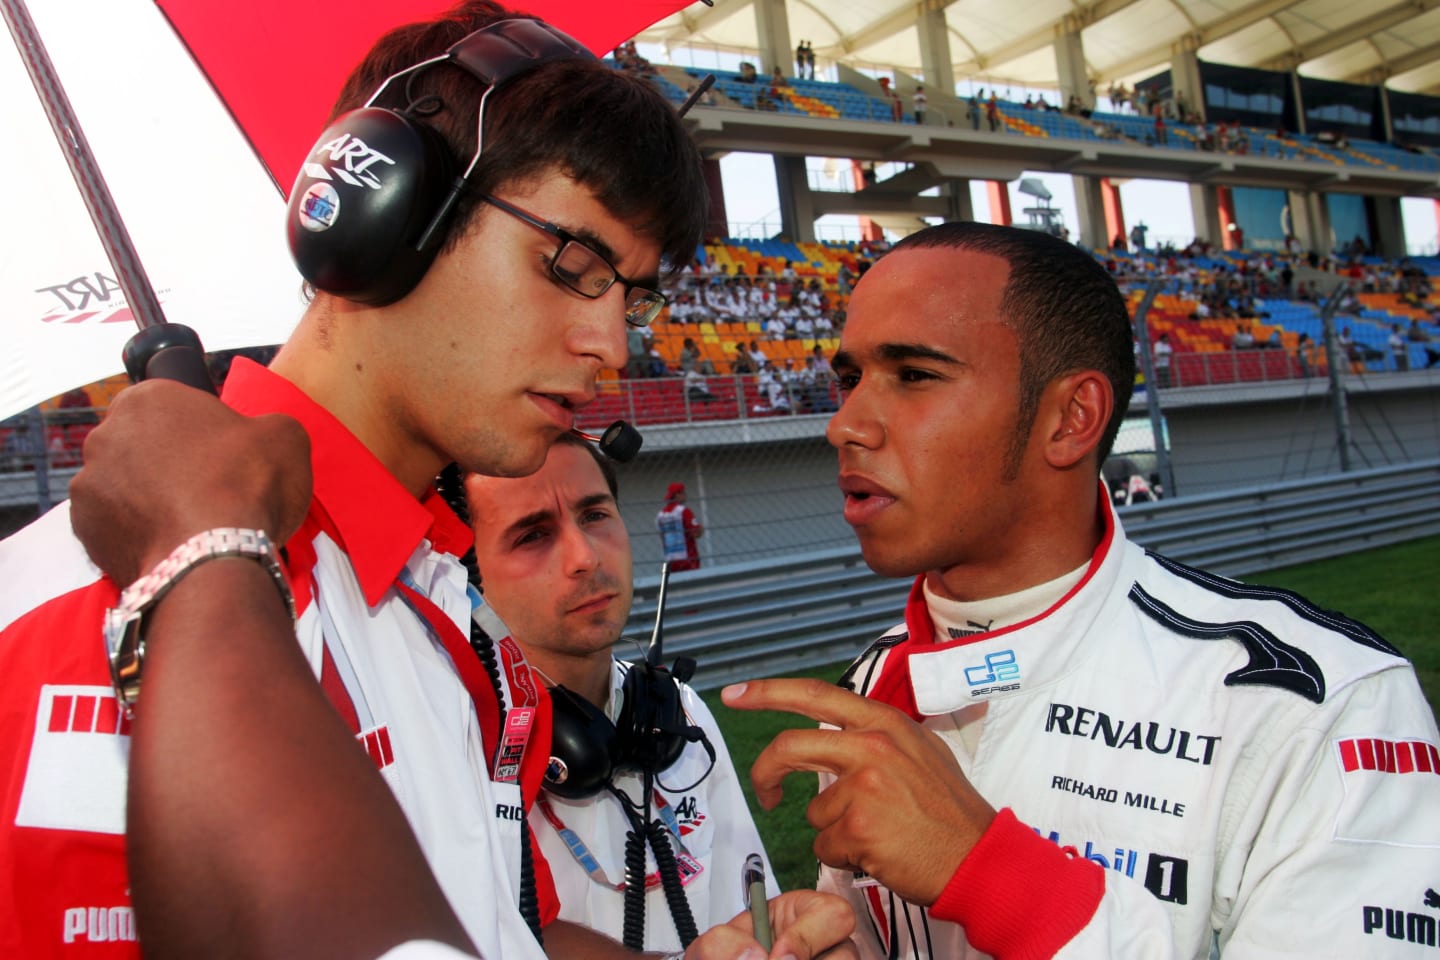 Lewis Hamilton moved to GP2 for 2006 as the reigning champion in European F3. He’d go on to take that year’s crown, netting five wins to claim the title ahead of Nelson Piquet Jnr, with his ART team mate Alexandre Premat a distant third. Hamilton’s F1 debut with McLaren followed the year after – and the rest is history...